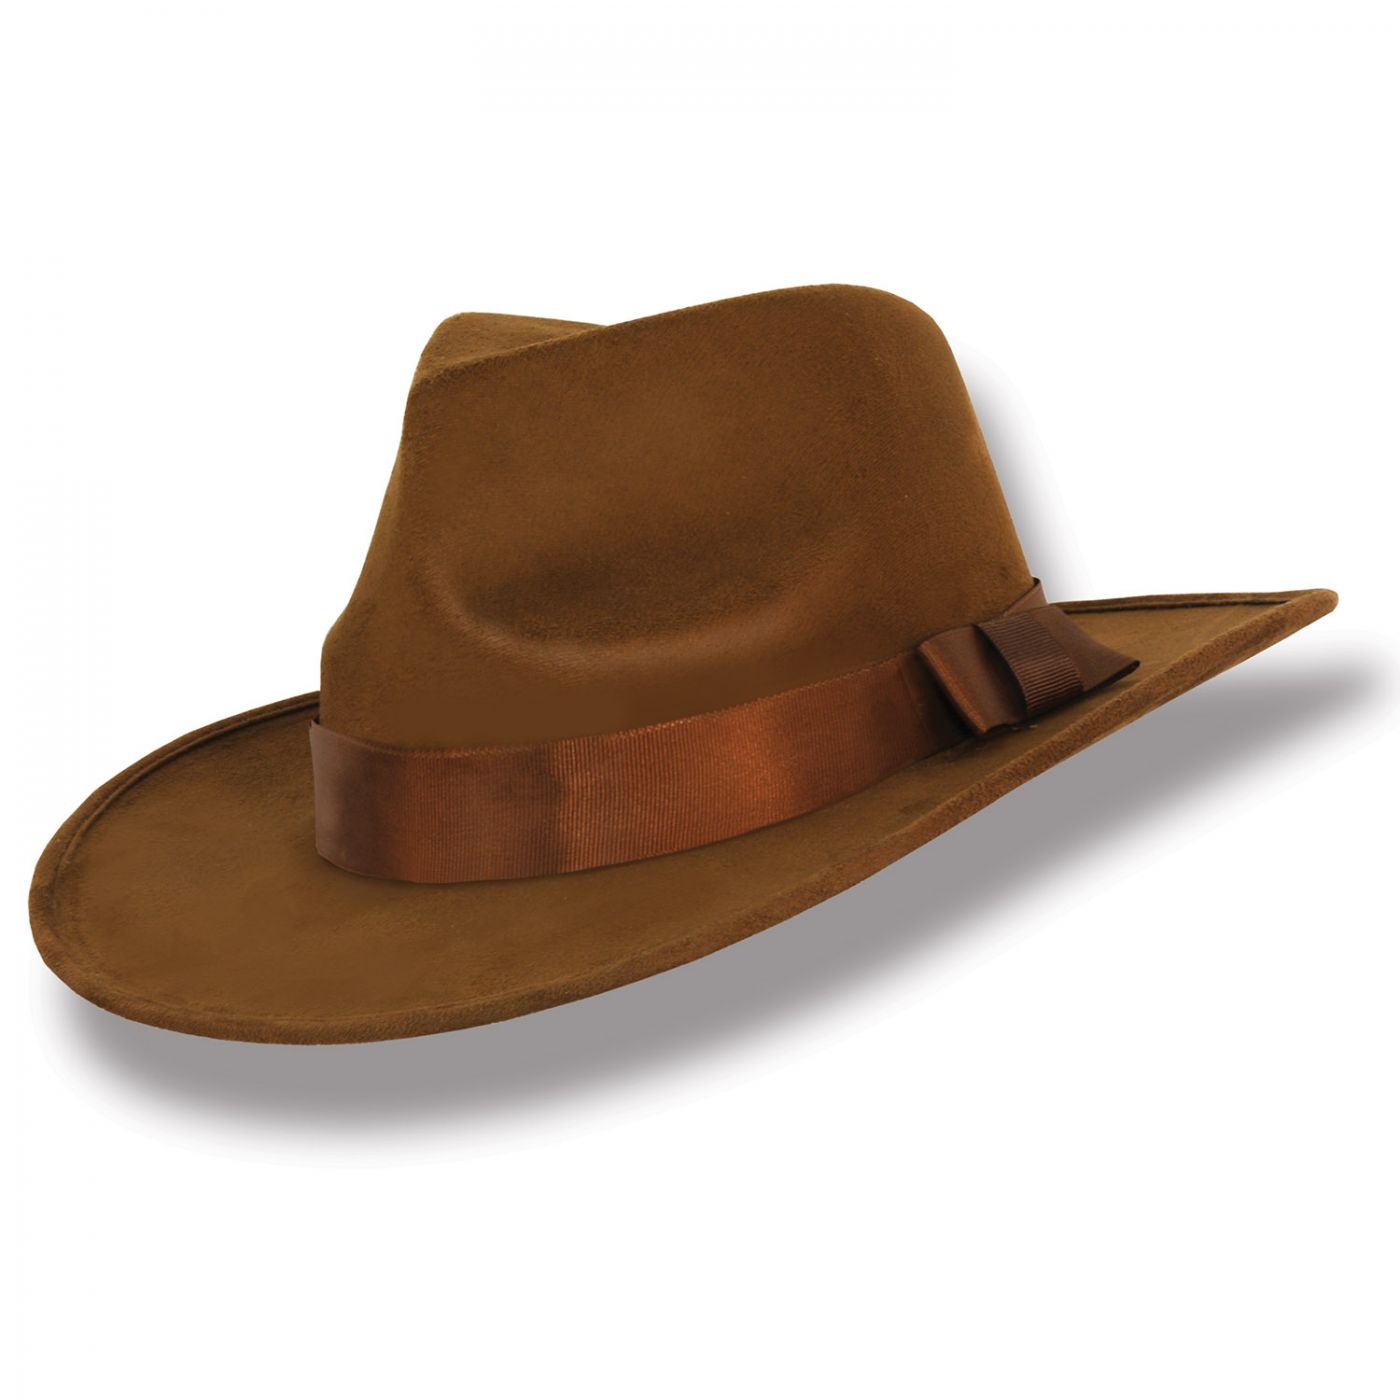 Image of Brown Fabric Fedora Hat (6)